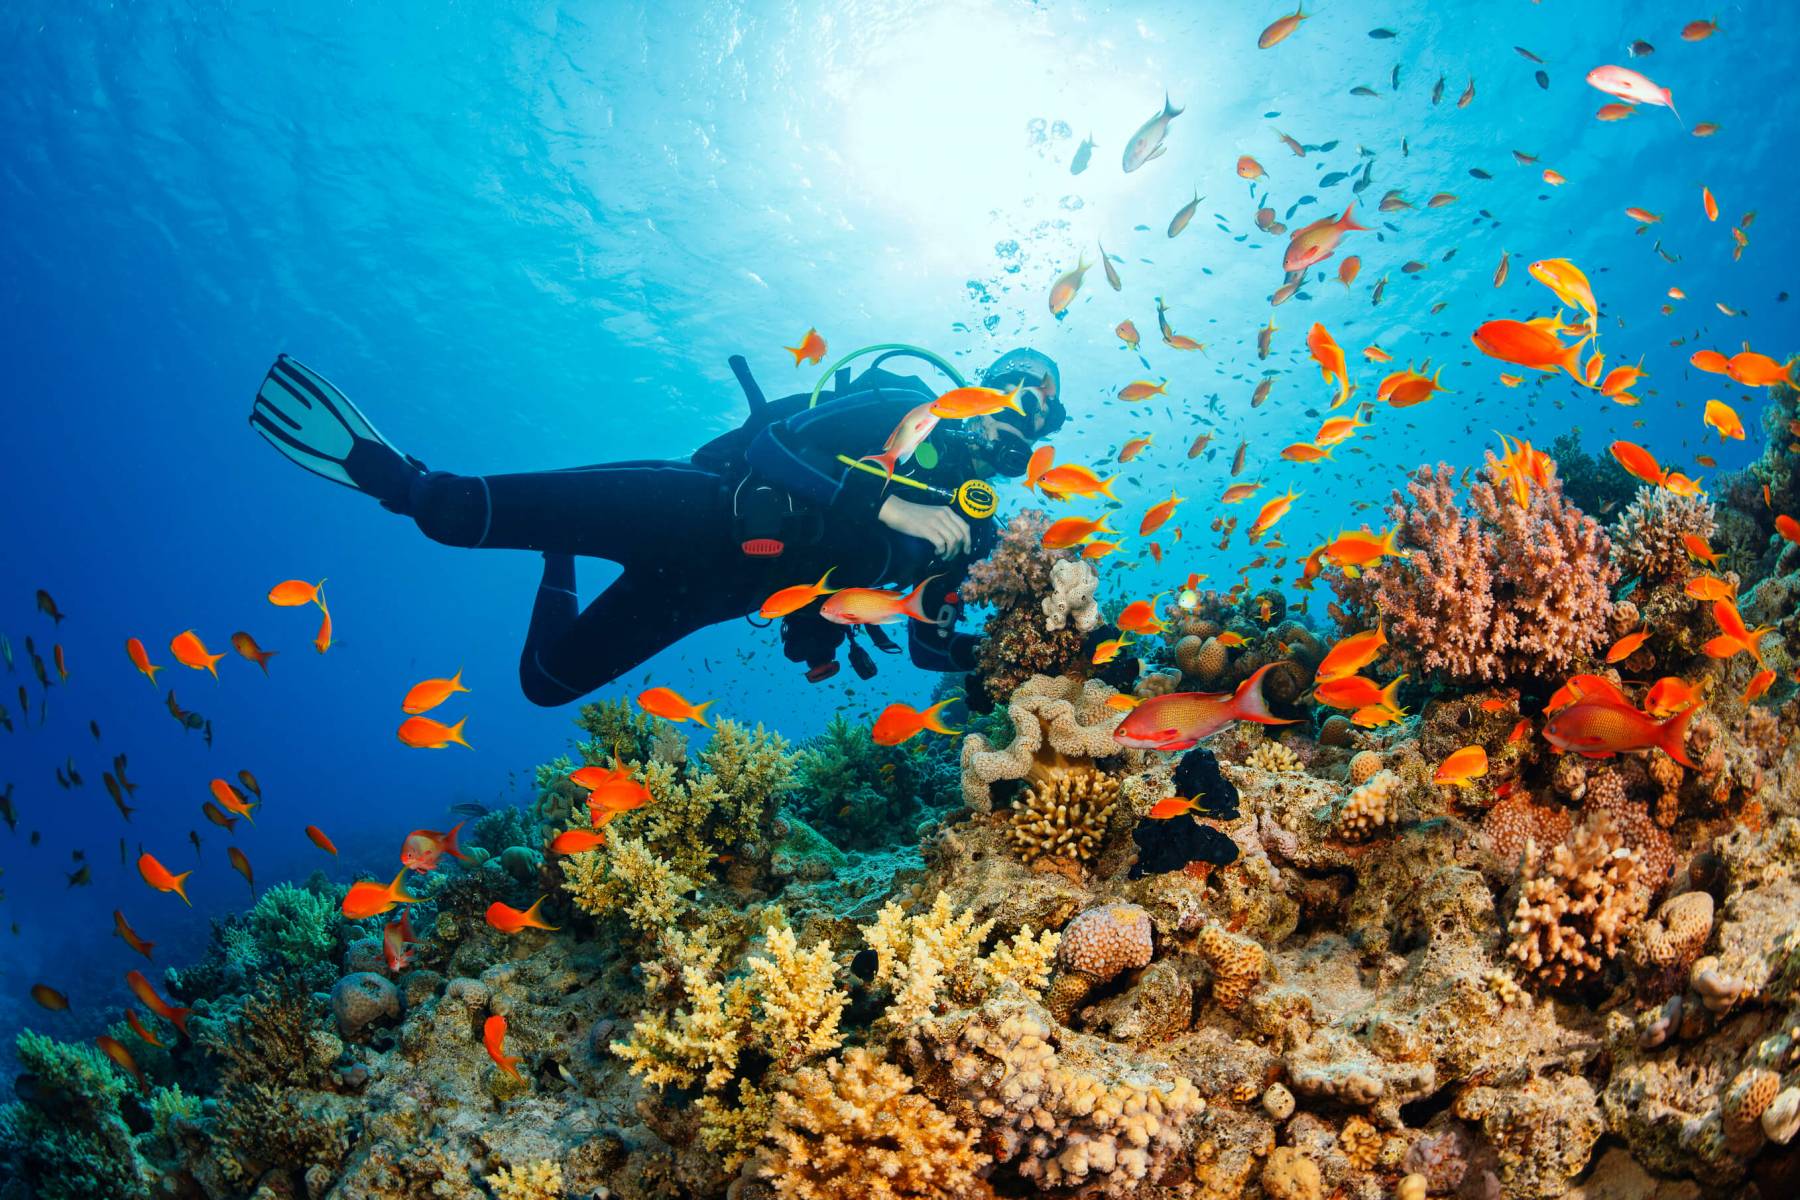 Get ready to take the plunge, Diving into the crystal clear waters in Phu Quoc and discovering its underwater wonders is an experience youll never forget - Phu Quoc snorkeling